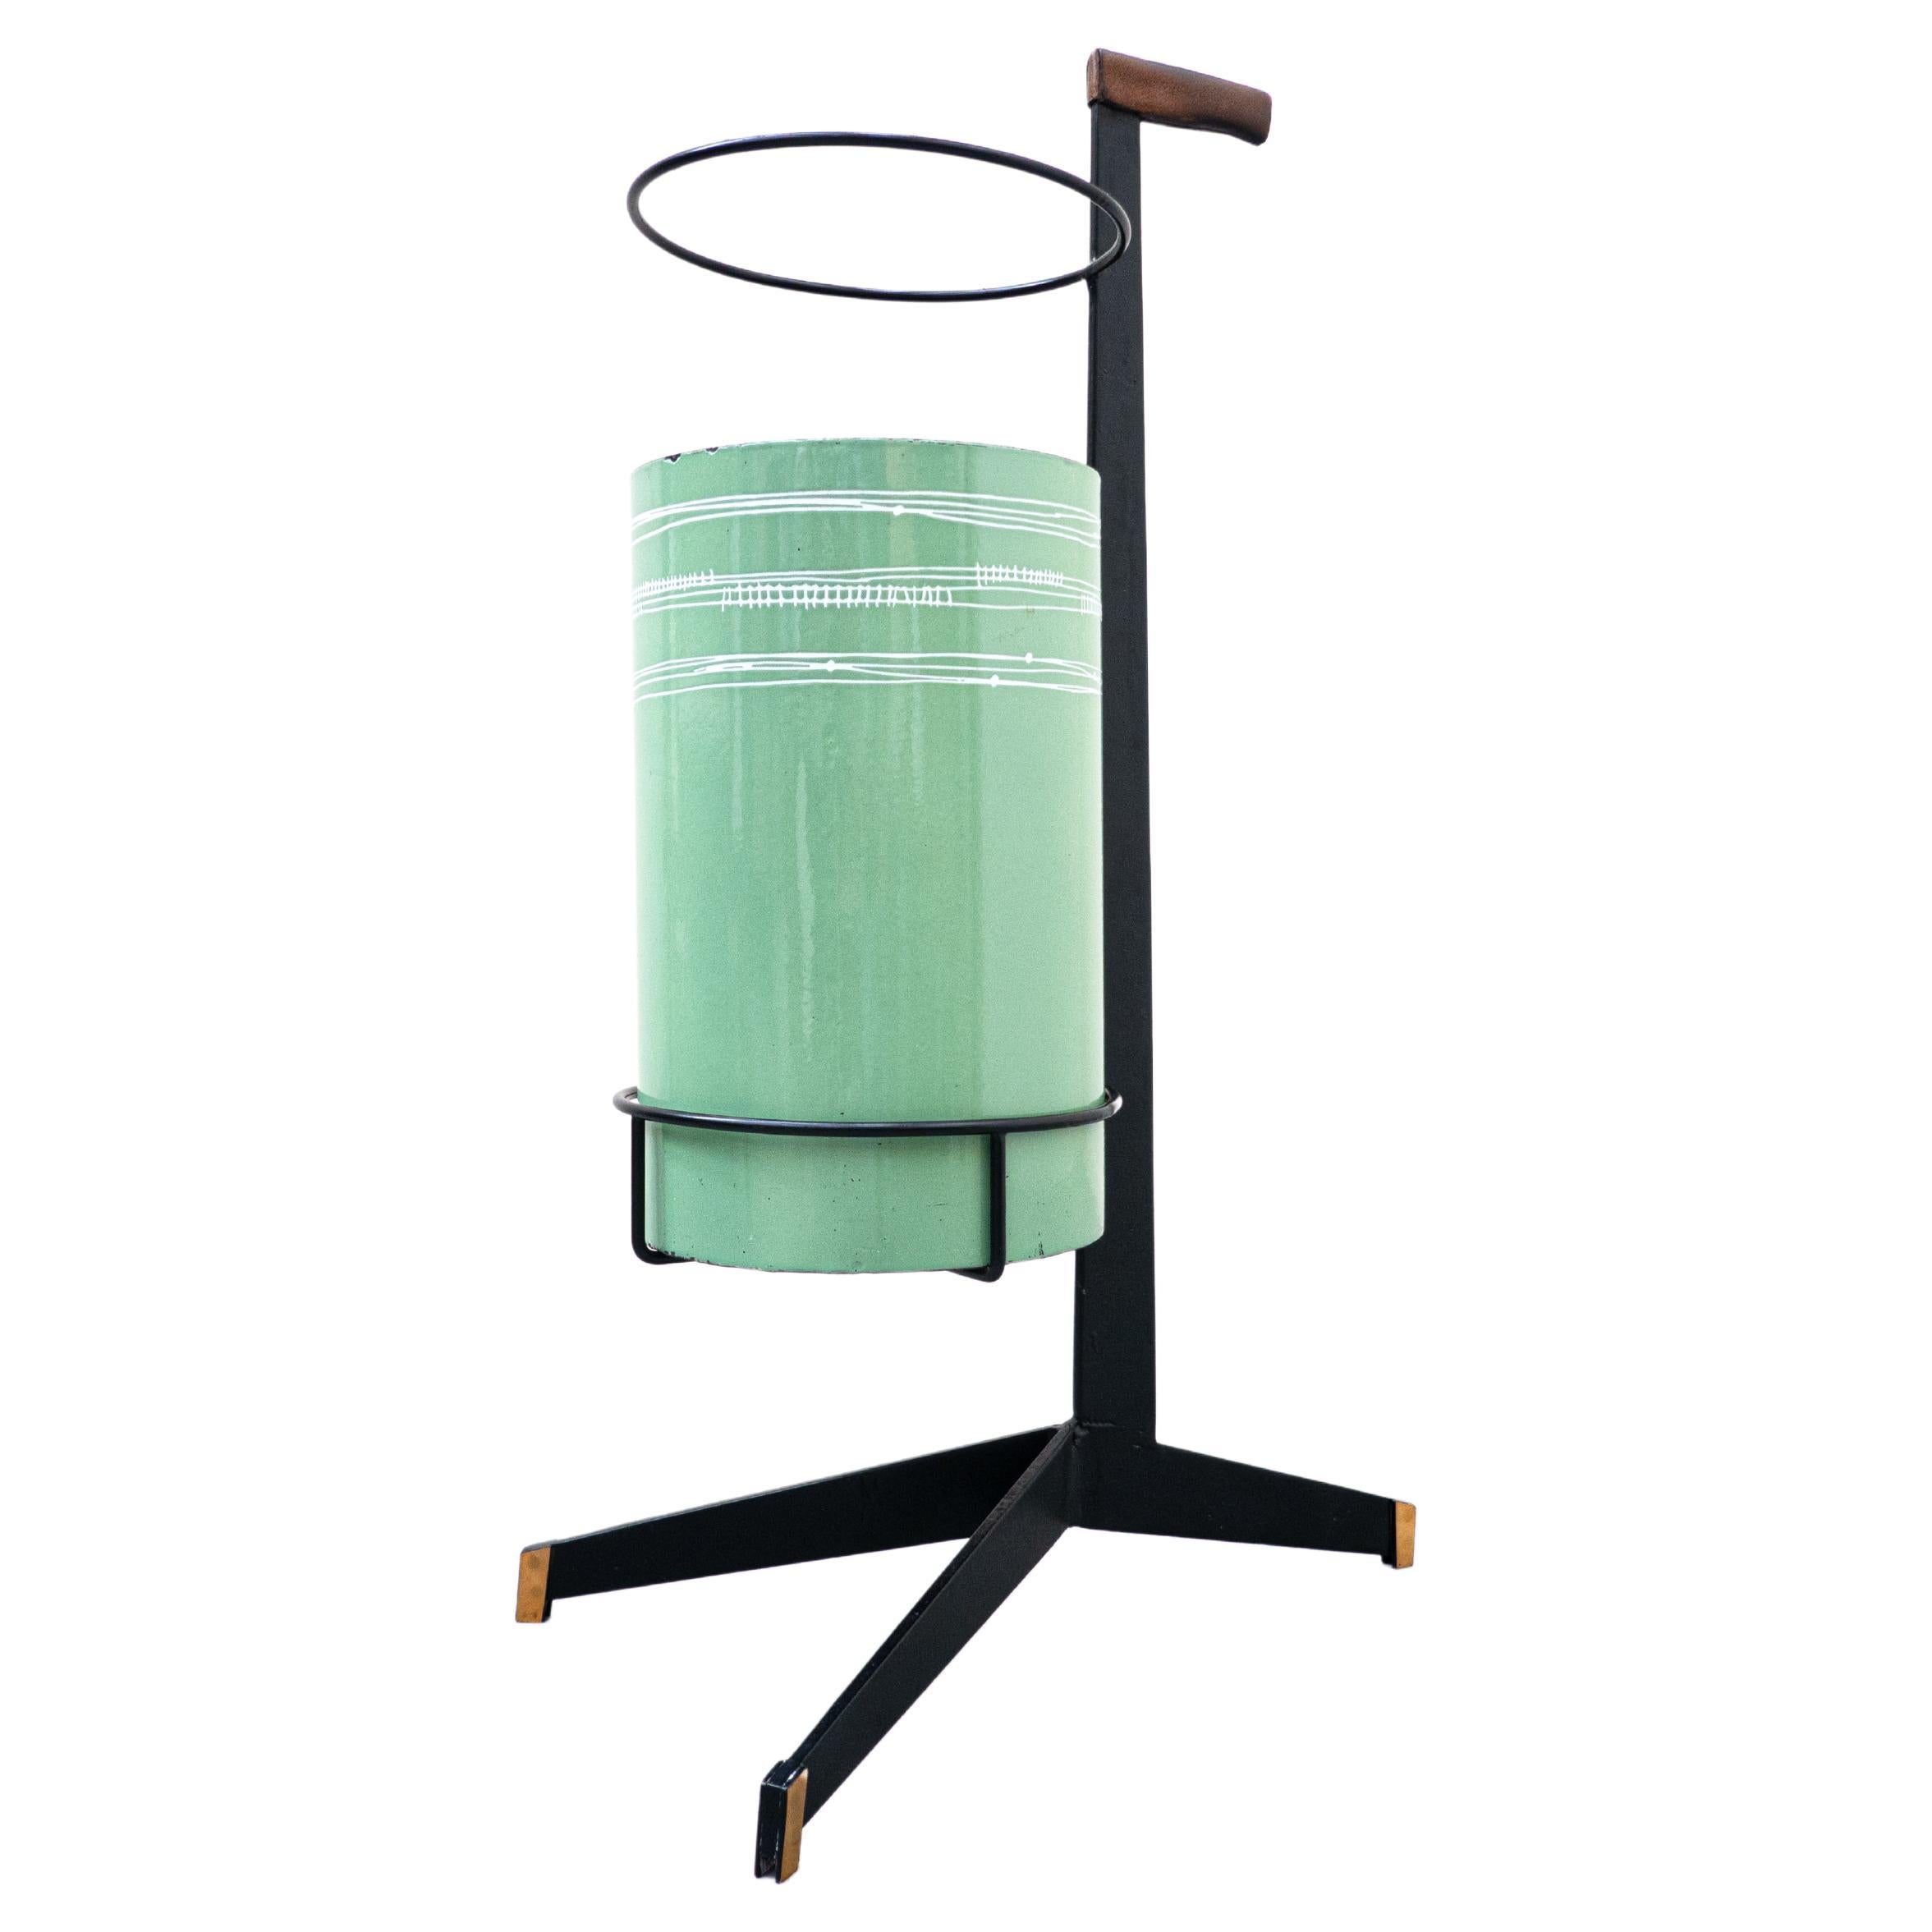 Mid-Century Modern Metal Umbrella Stand by Siva Poggibonsi, Italy, 1950s For Sale